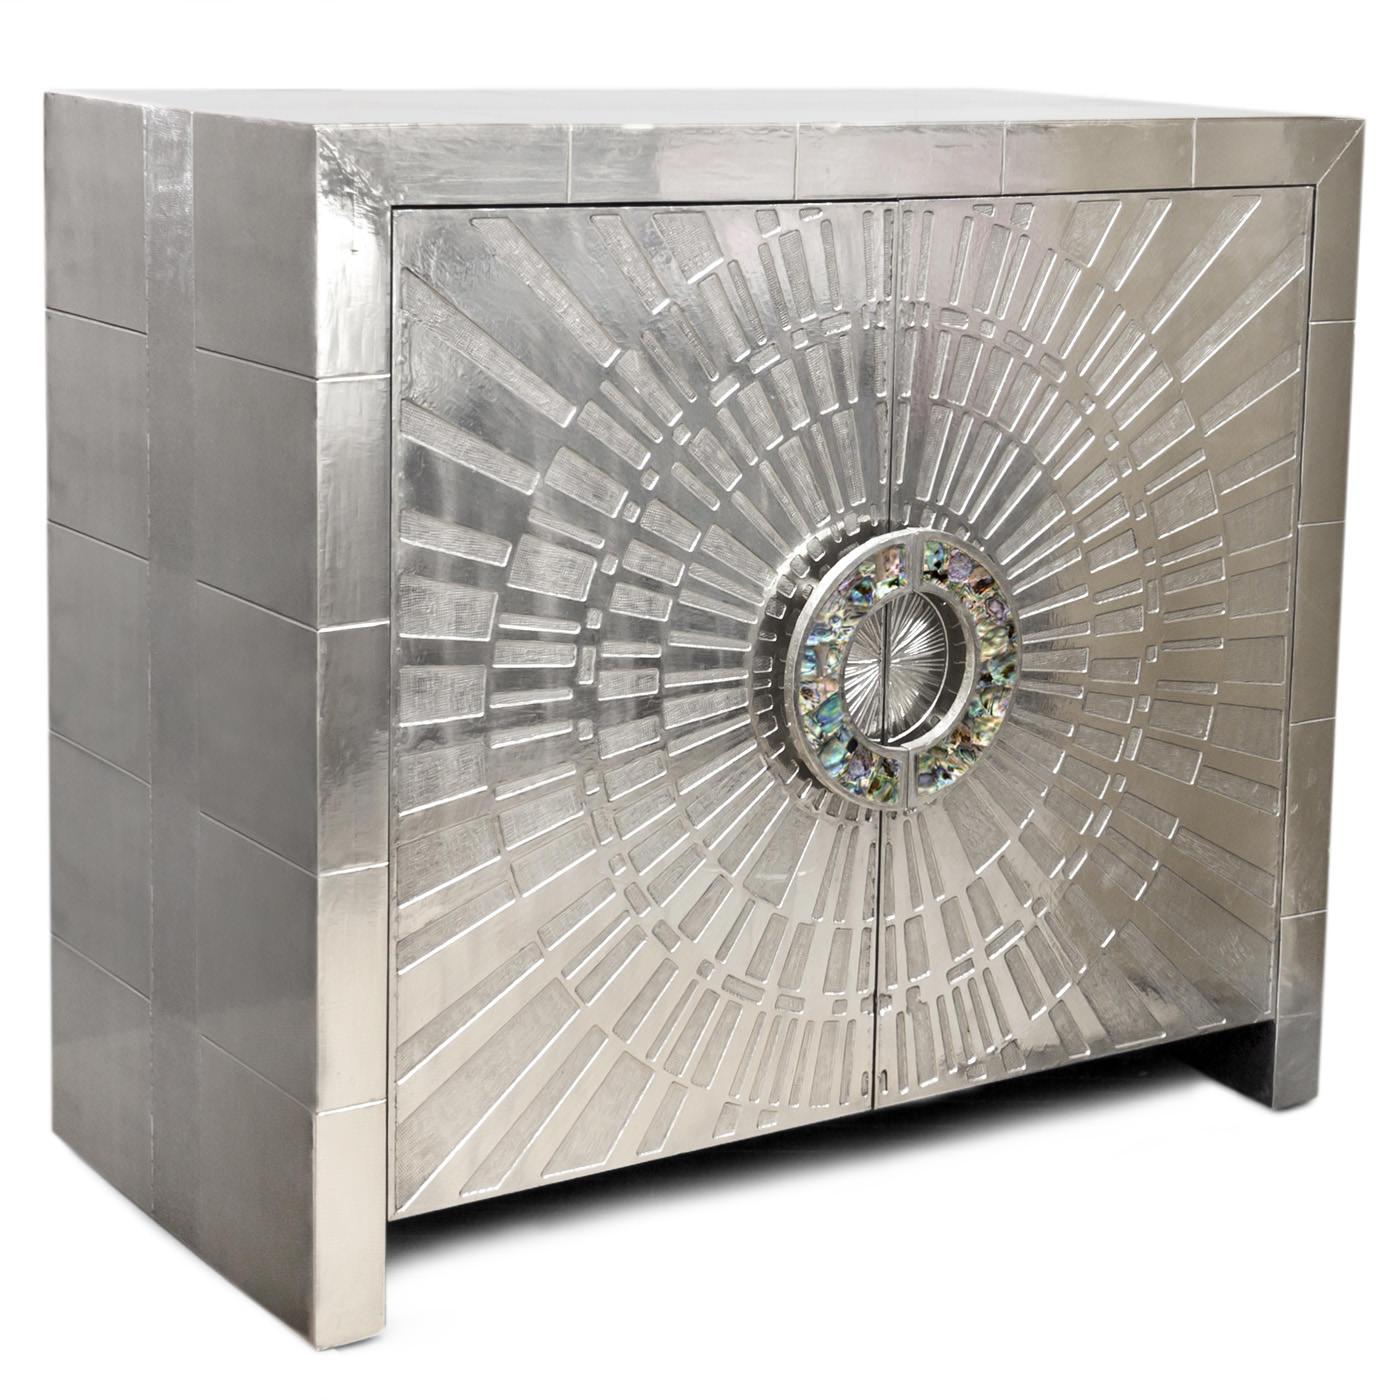 Global glamour. Crafted from nickel-plated metal with hand-stamped patterns applied to Minimalist, modernist forms, Our Talitha console is jewelry for your home. The surface is reminiscent of silver leaf it emits that same lustrous glow—but is